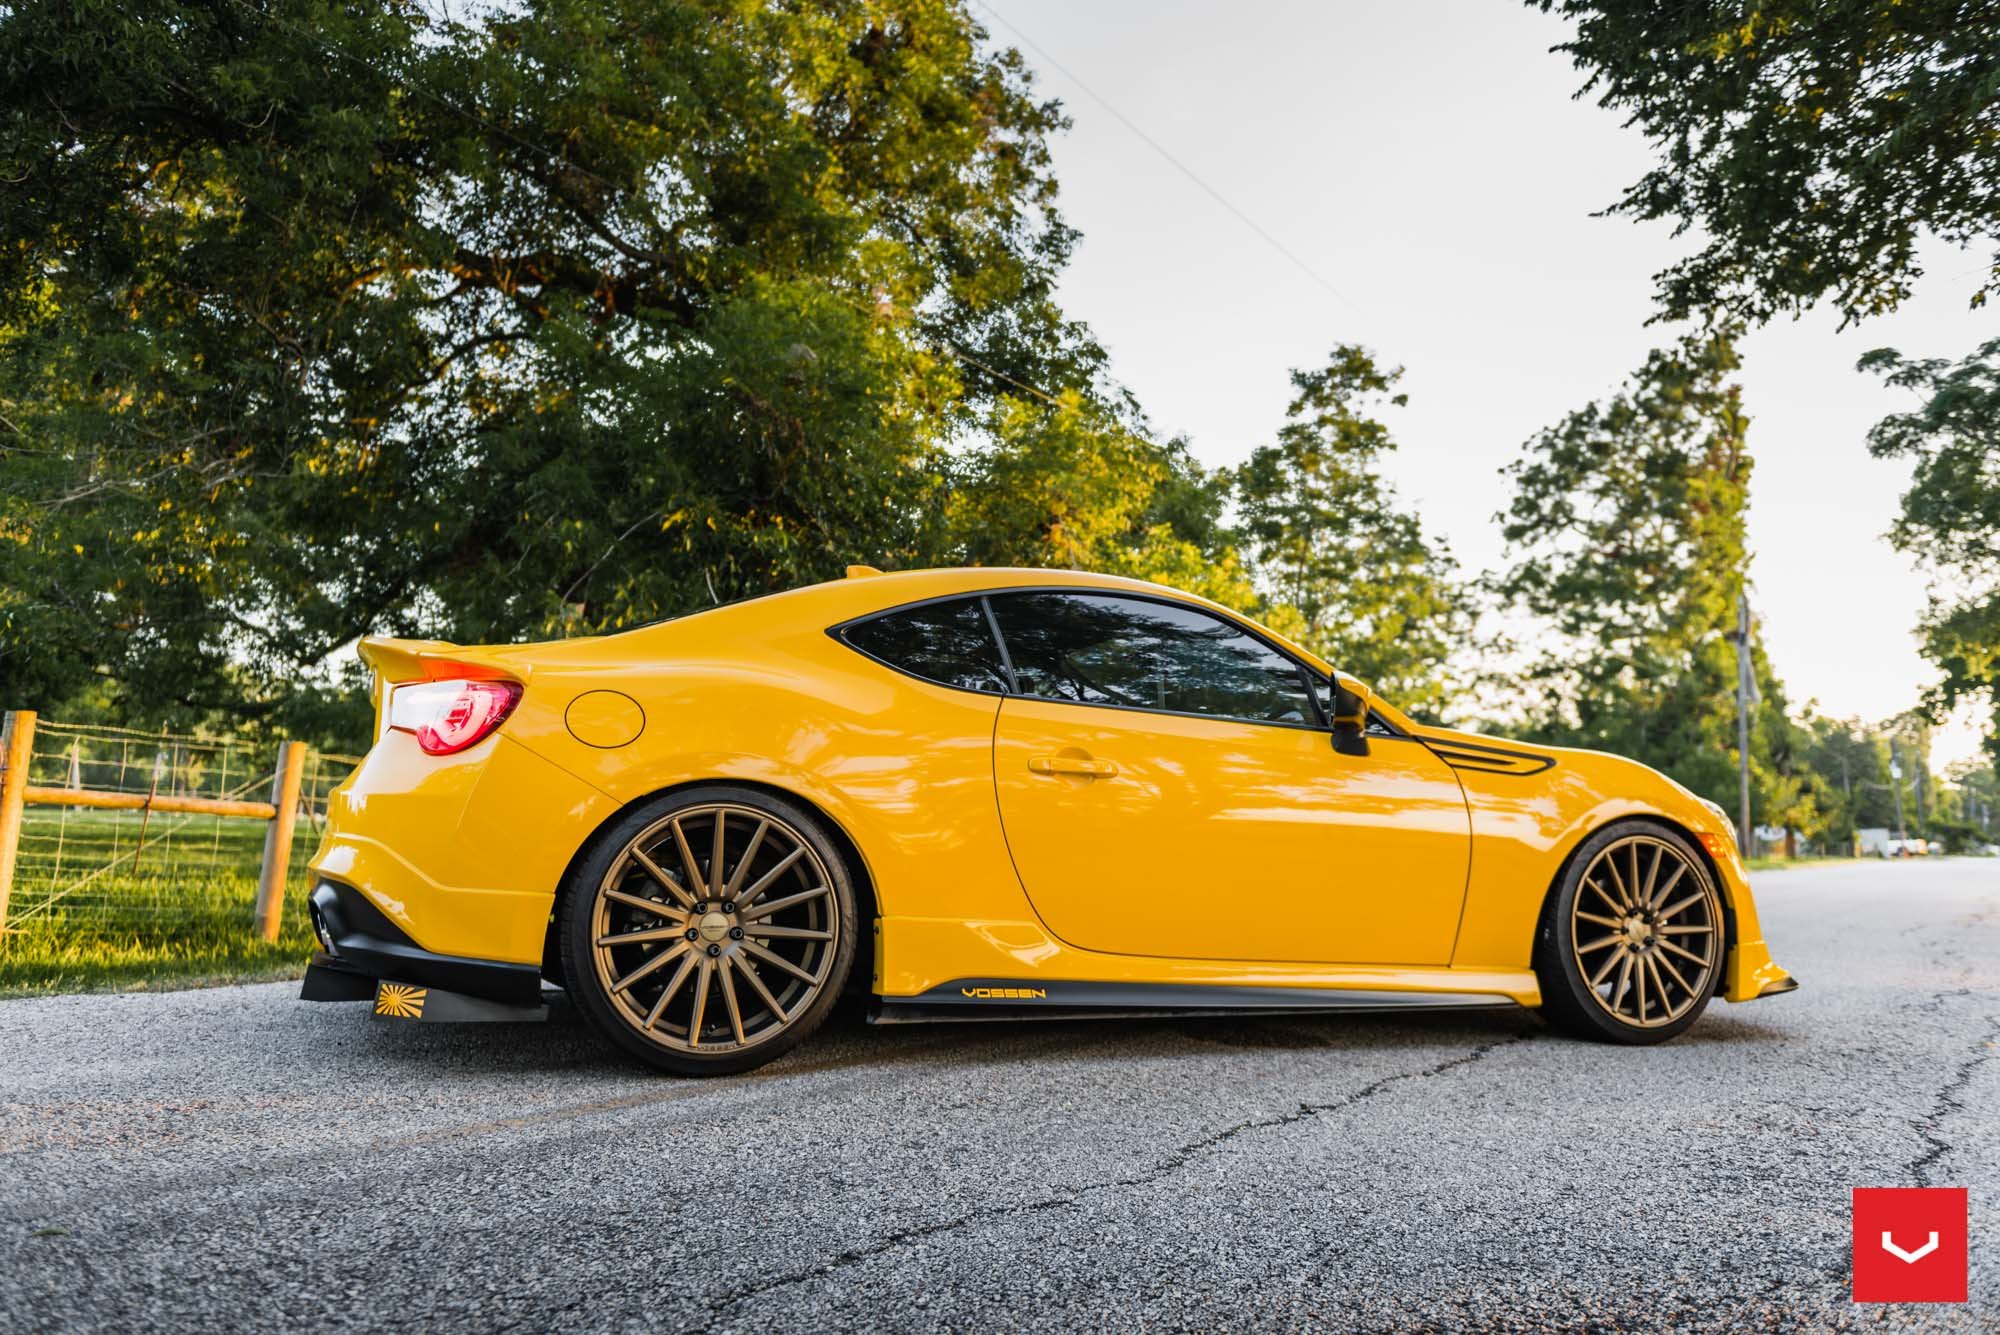 Aftermarket Side Skirts on Yellow Scion FR-S - Photo by Vossen